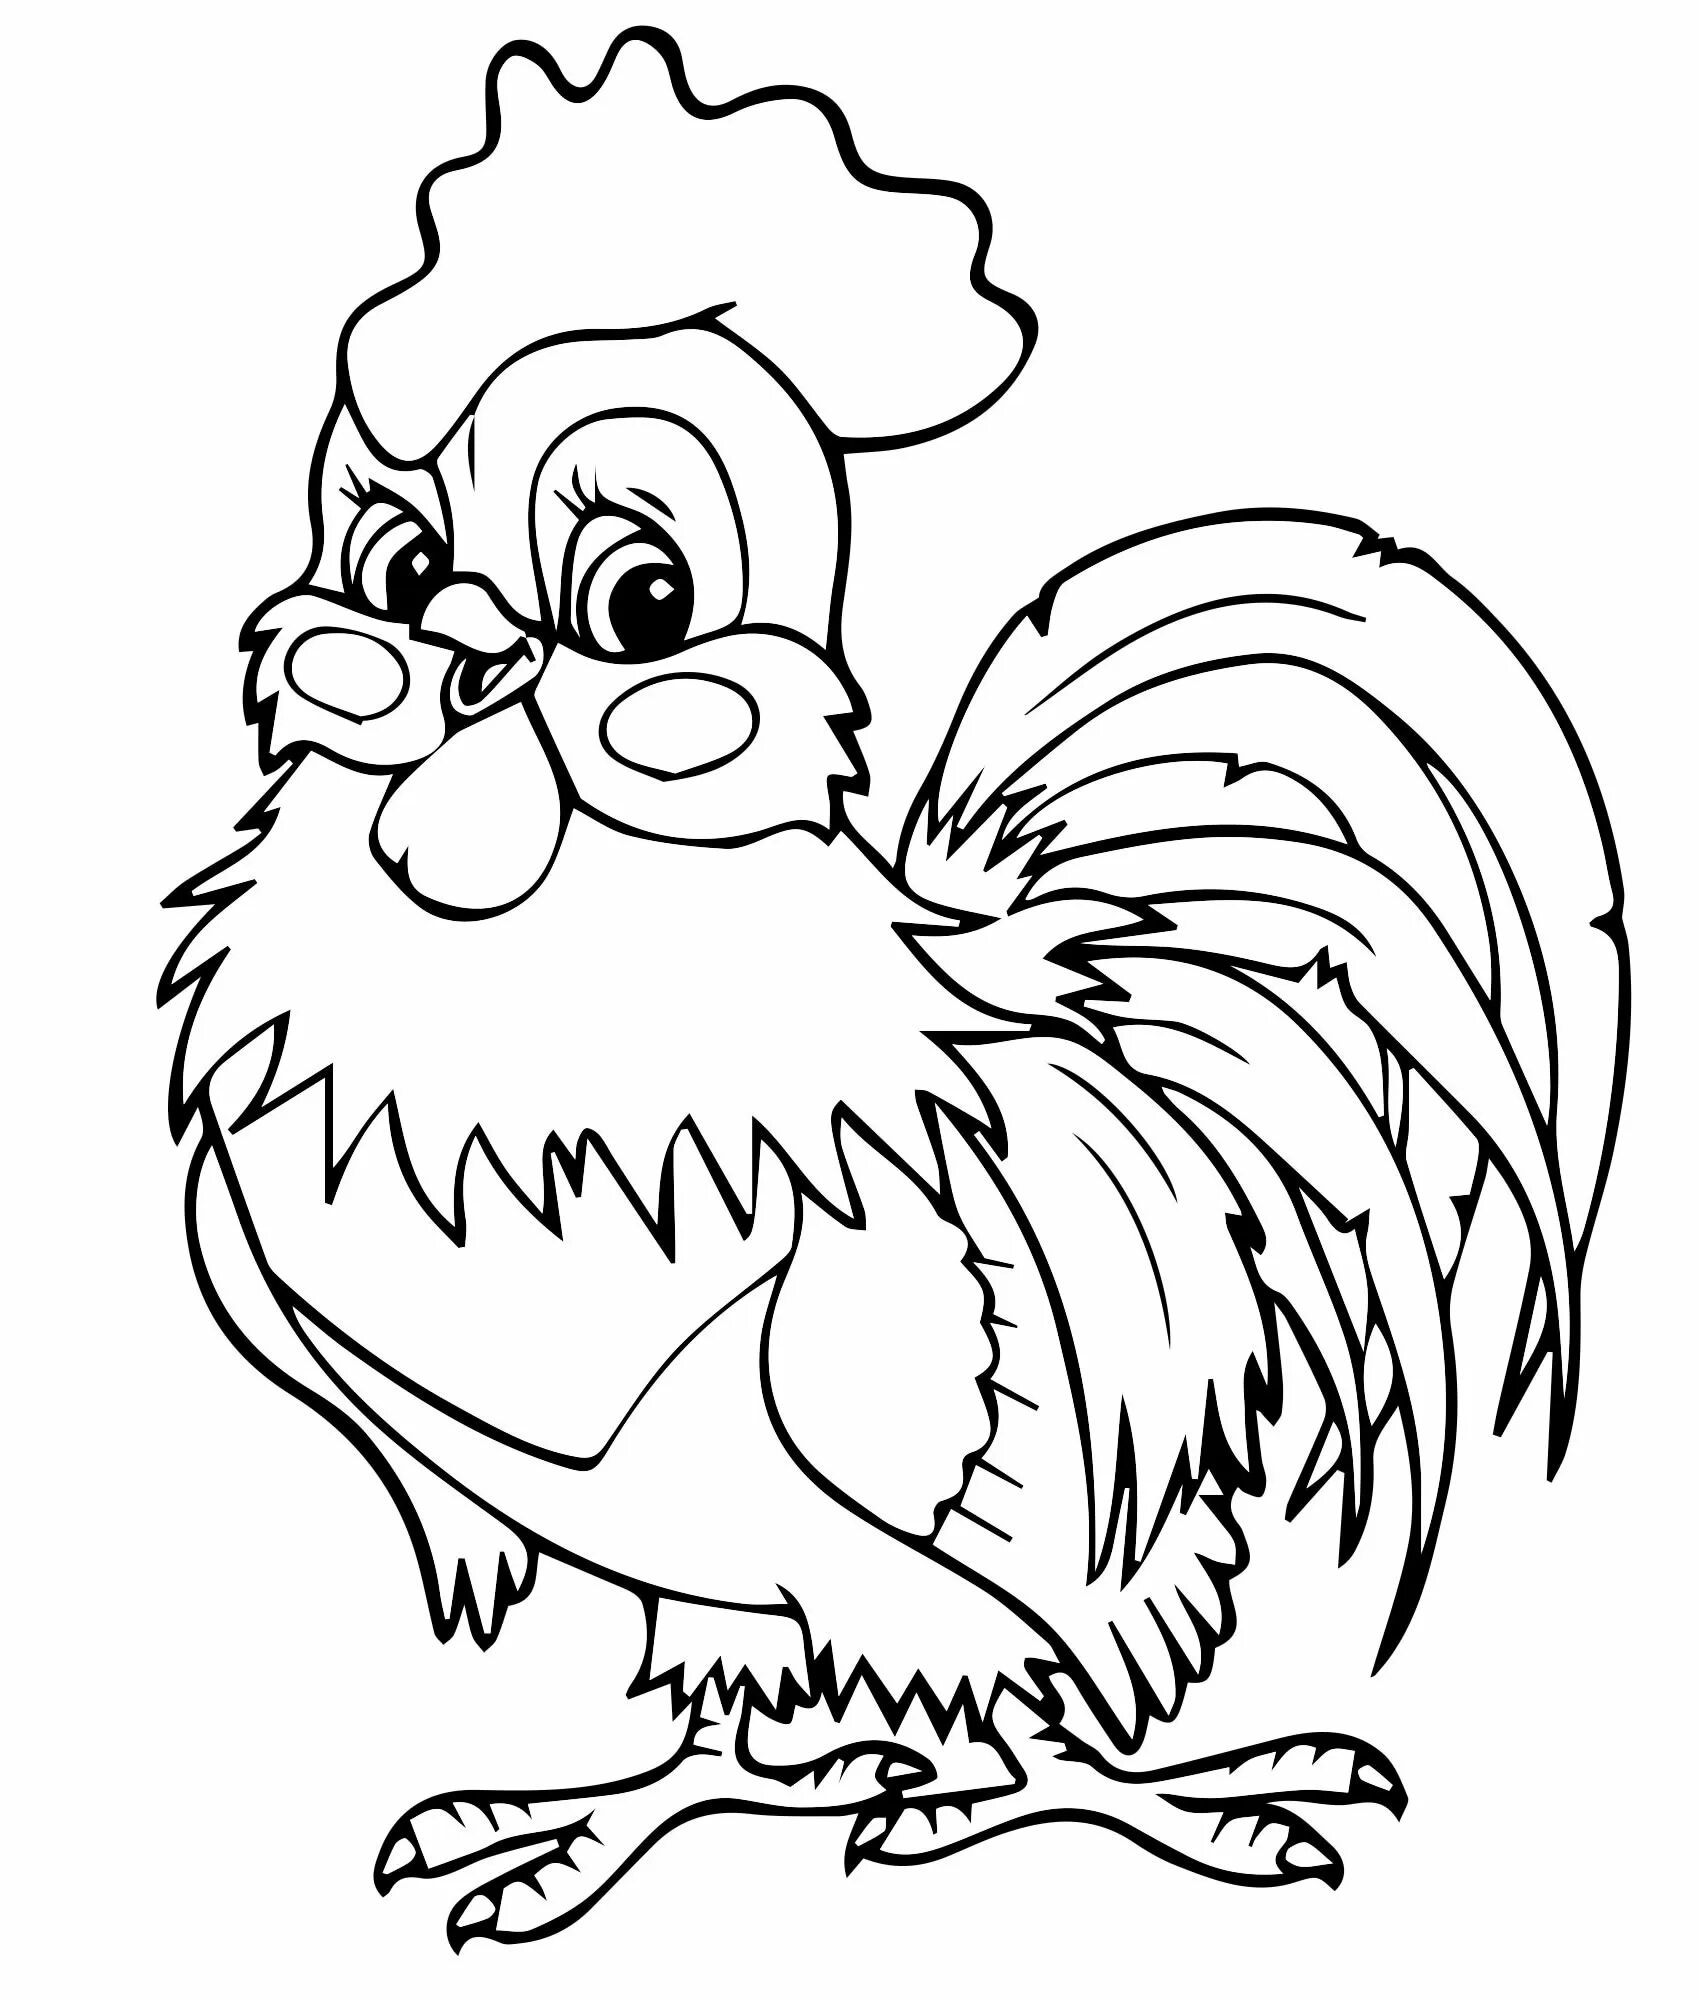 Sparkling Rooster Coloring Page for Toddlers